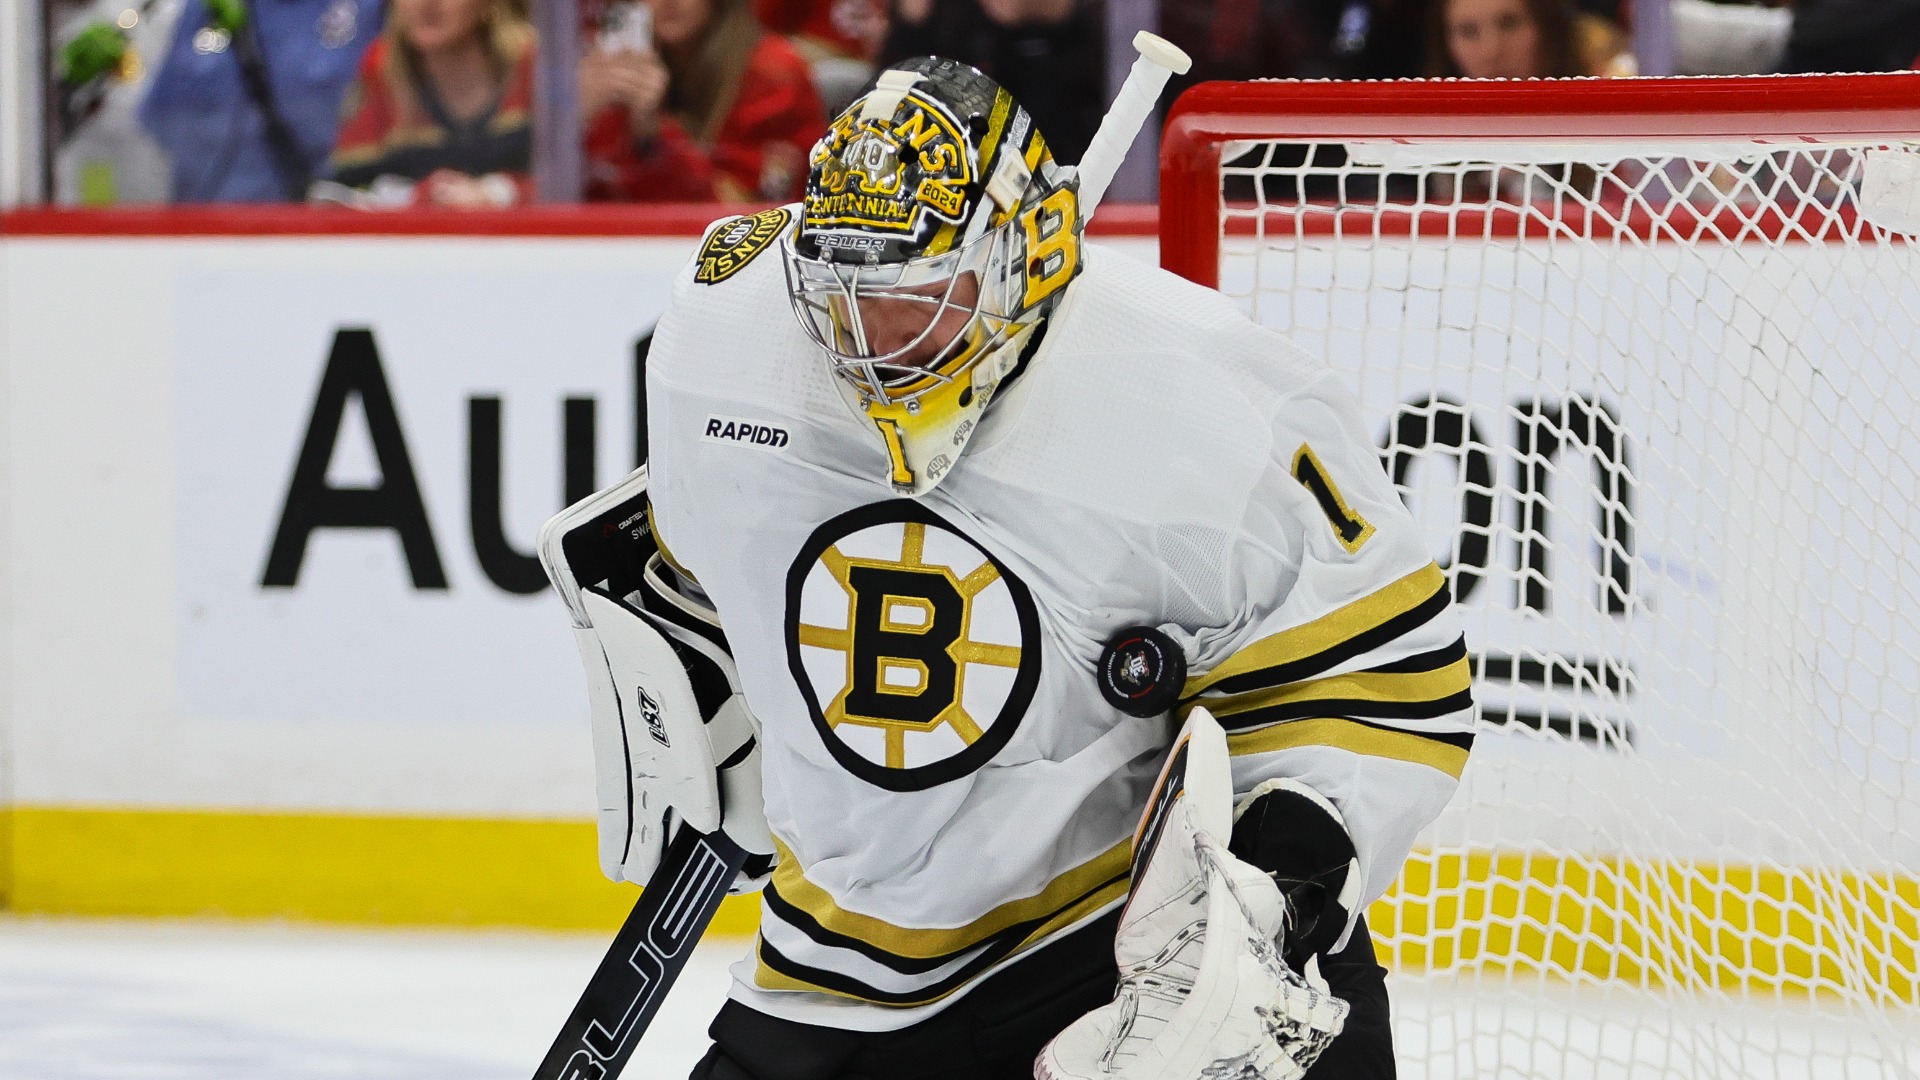 How Bruins’ Jeremy Swayman Felt About Being Pulled In Game 2 Loss